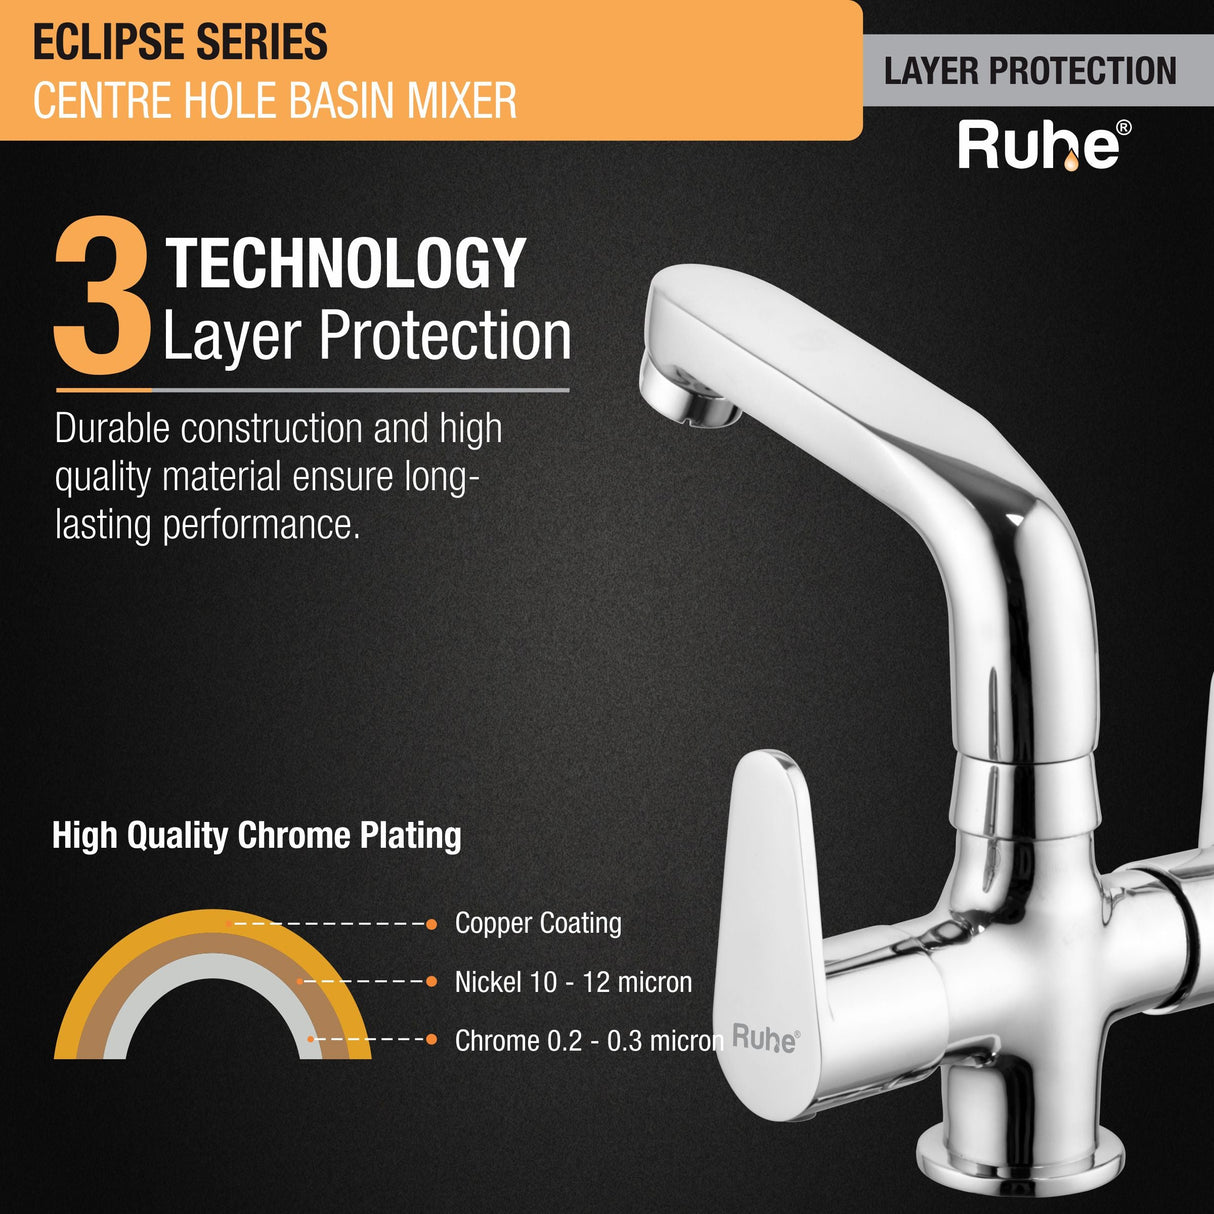 Eclipse Centre Hole Basin Mixer with Small (7 inches) Swivel Spout Faucet 3 layer protection